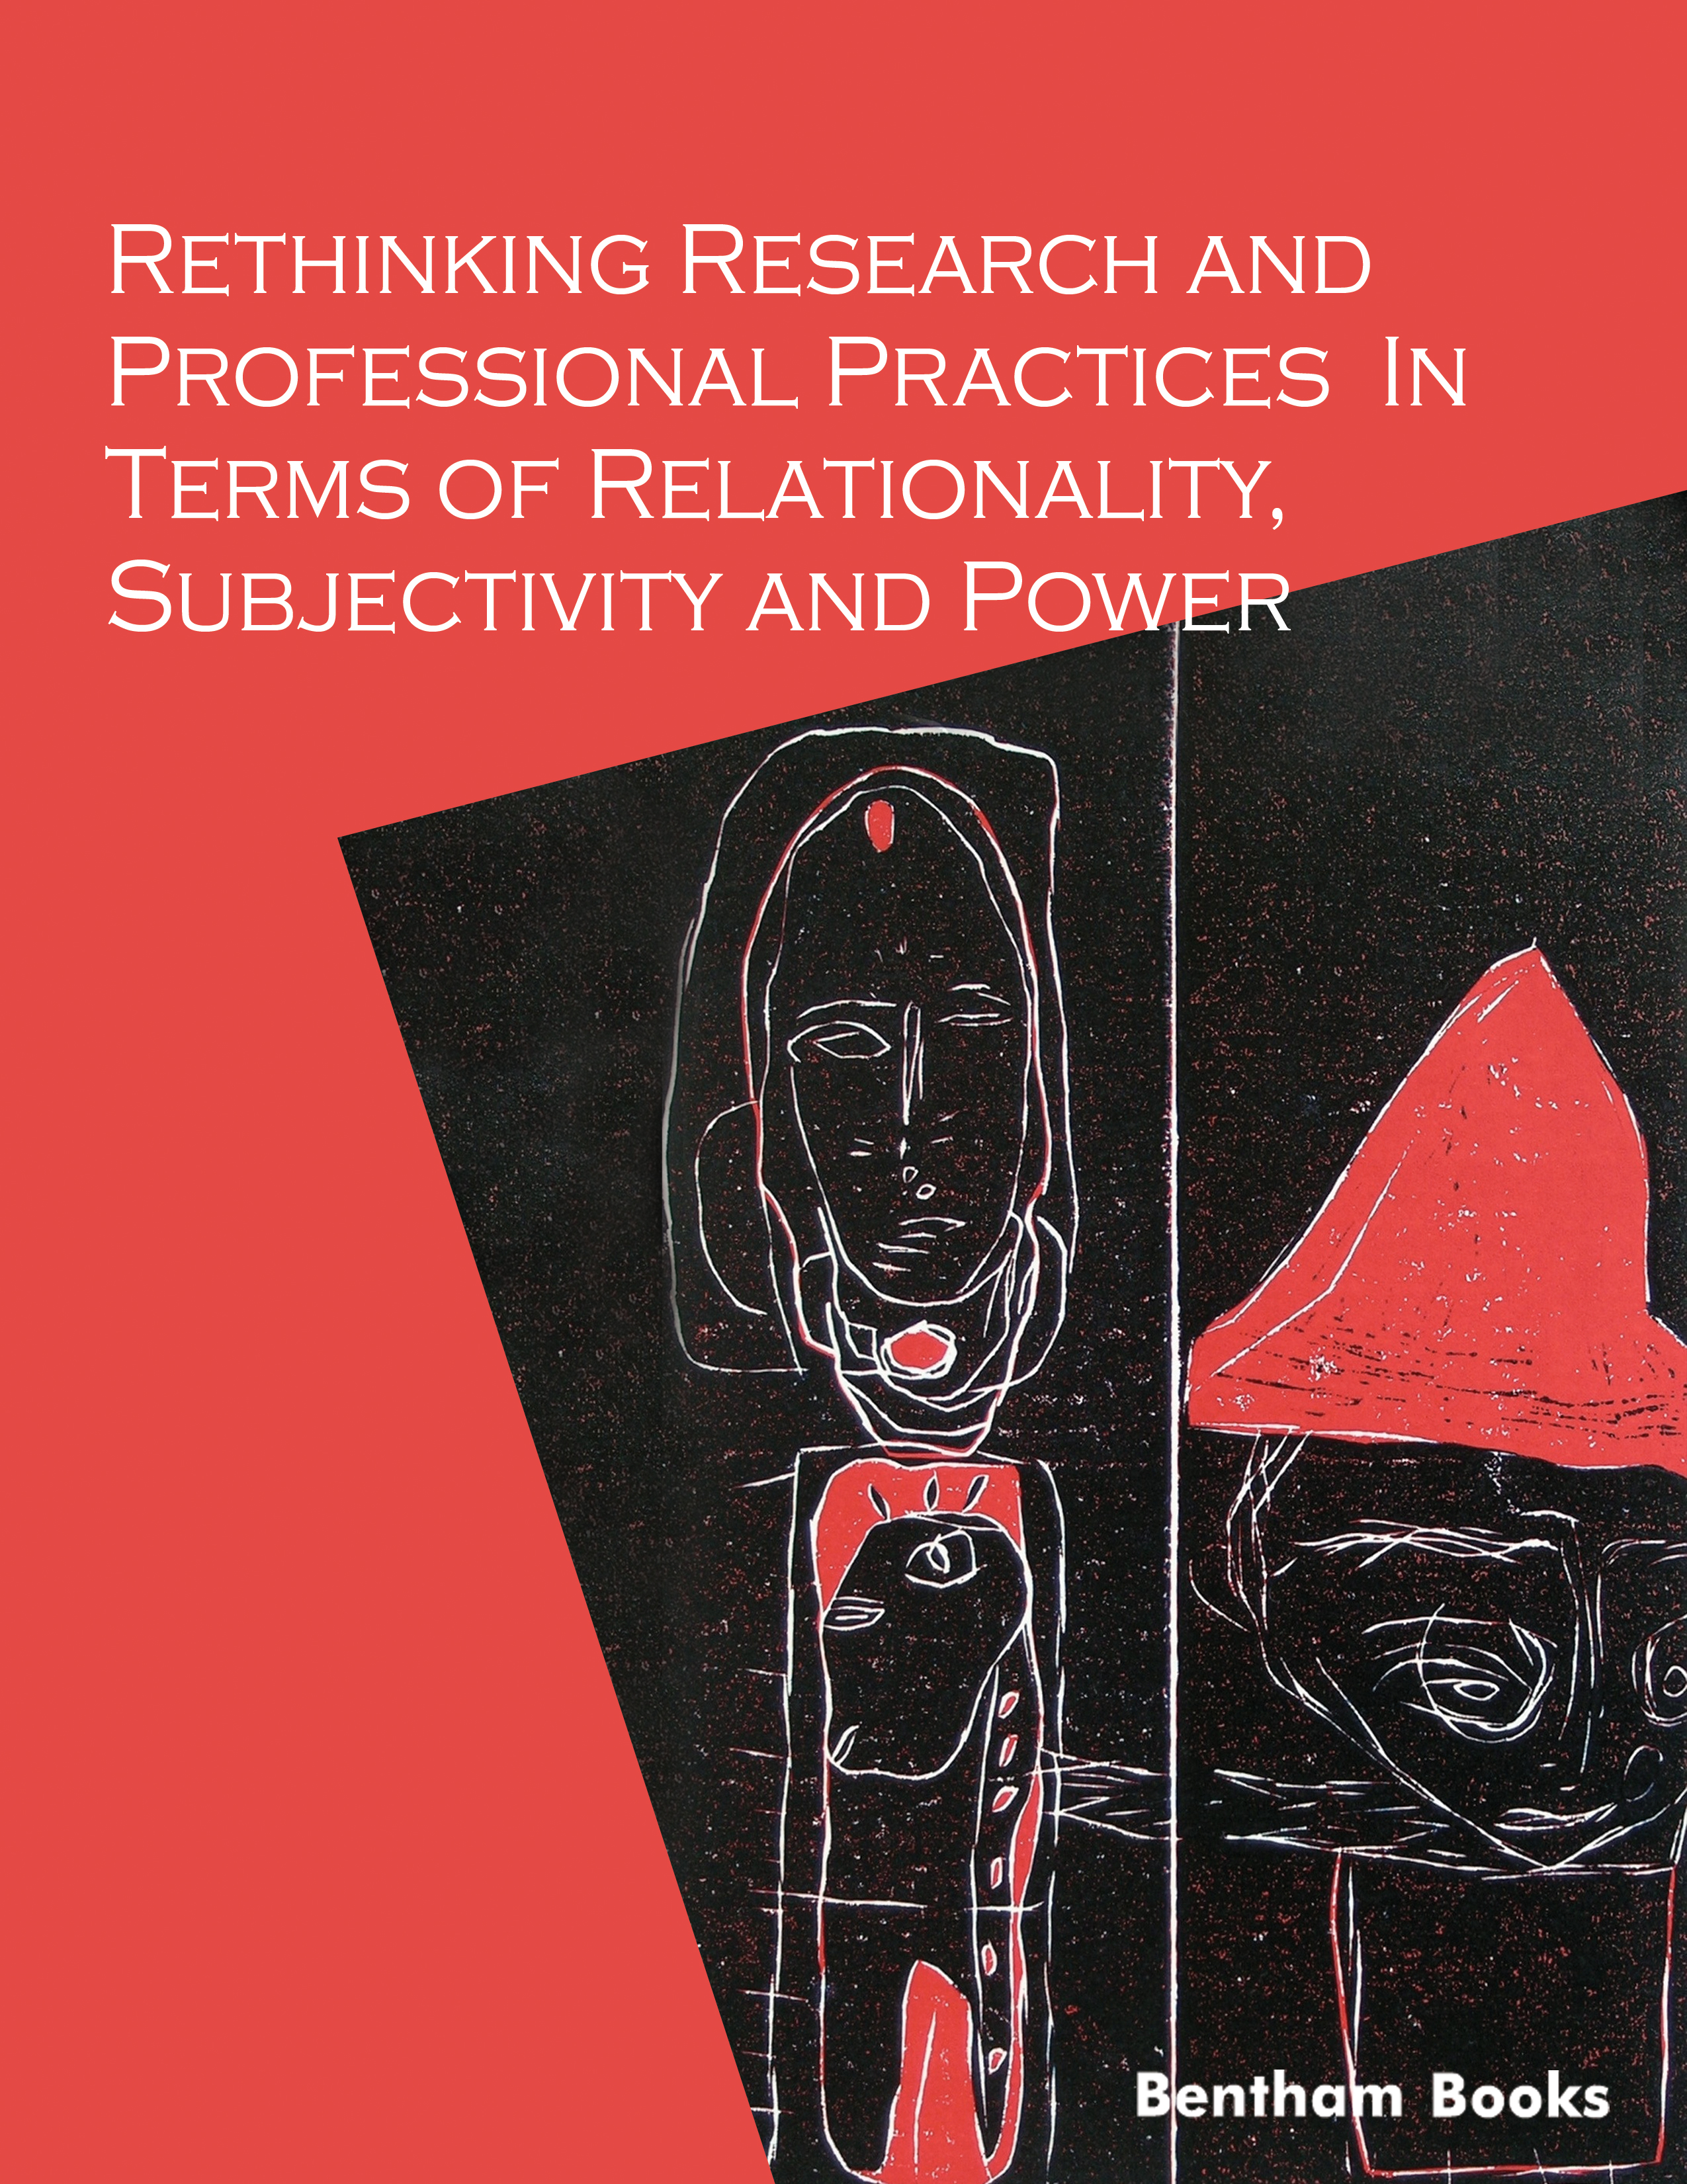 Rethinking Research And Professional Practices In Terms Of Relationality, Subjectivity And Power